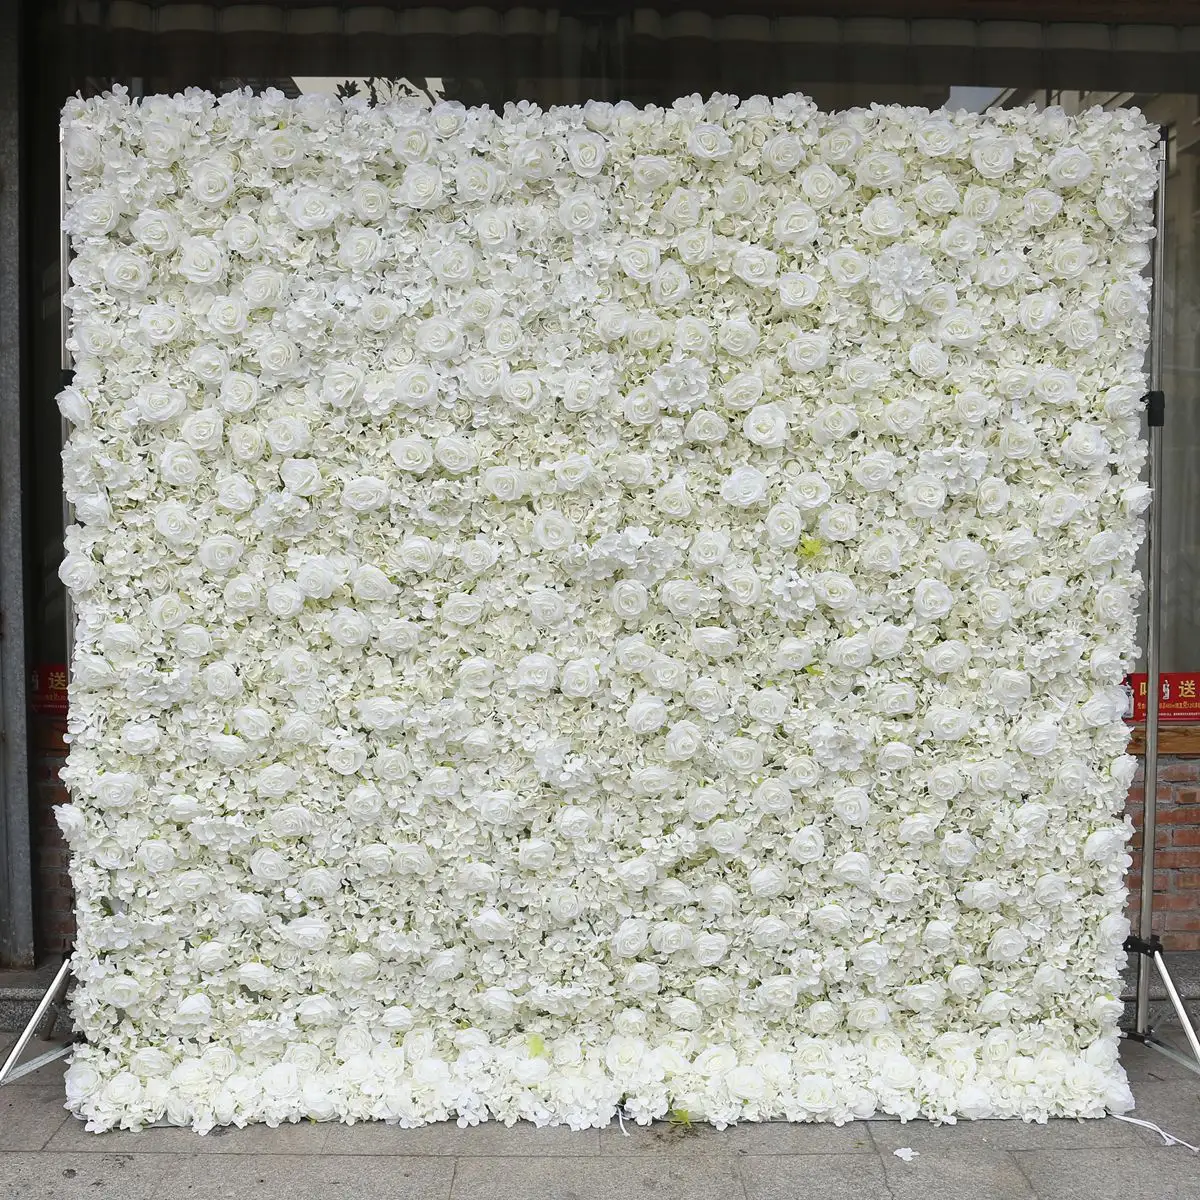 lower Wall Panels, 12 x 16 inch ArtArtificial Hydrangea Flower Wall Backdrop White Flower Wall Decor for Wedding Party